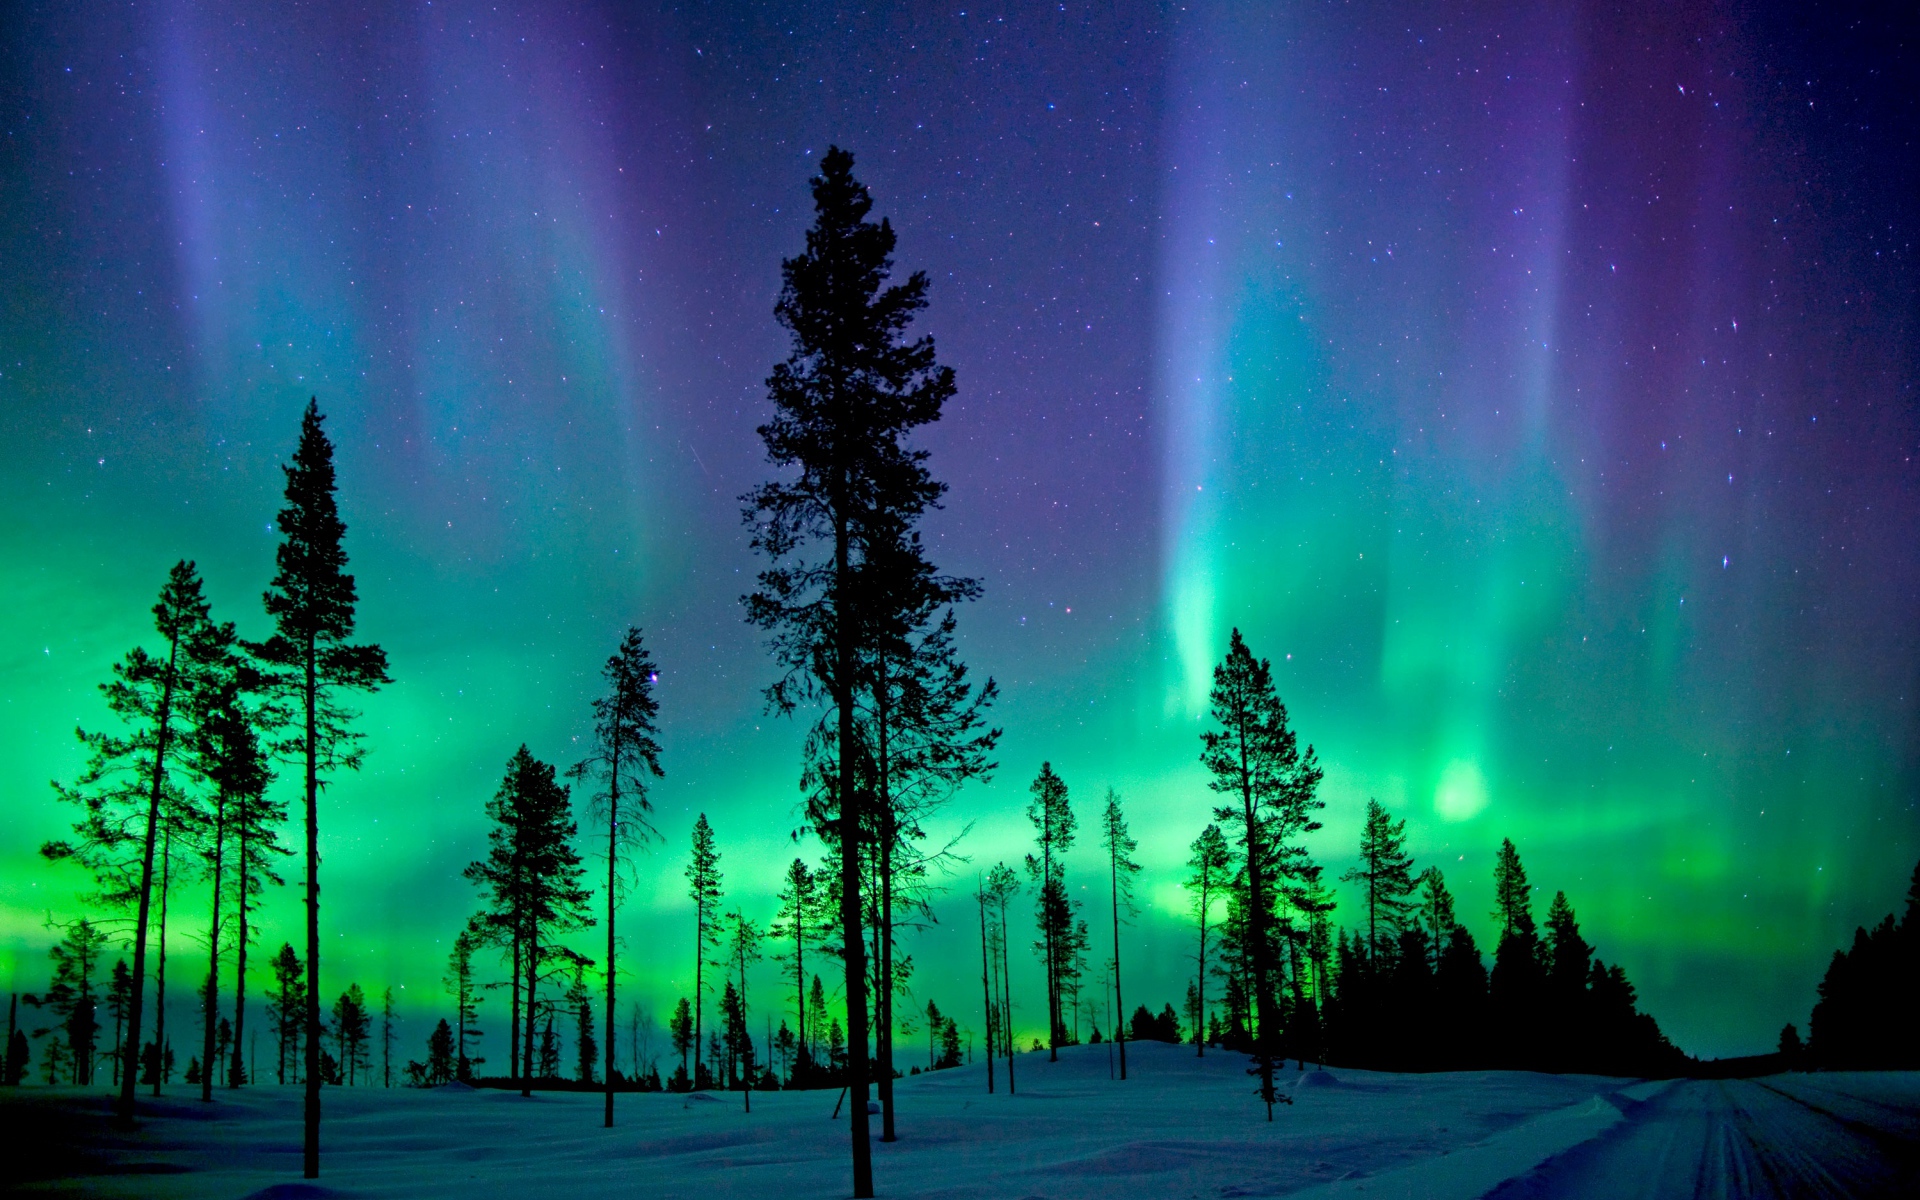 Northern lights above the snow-covered pine forest